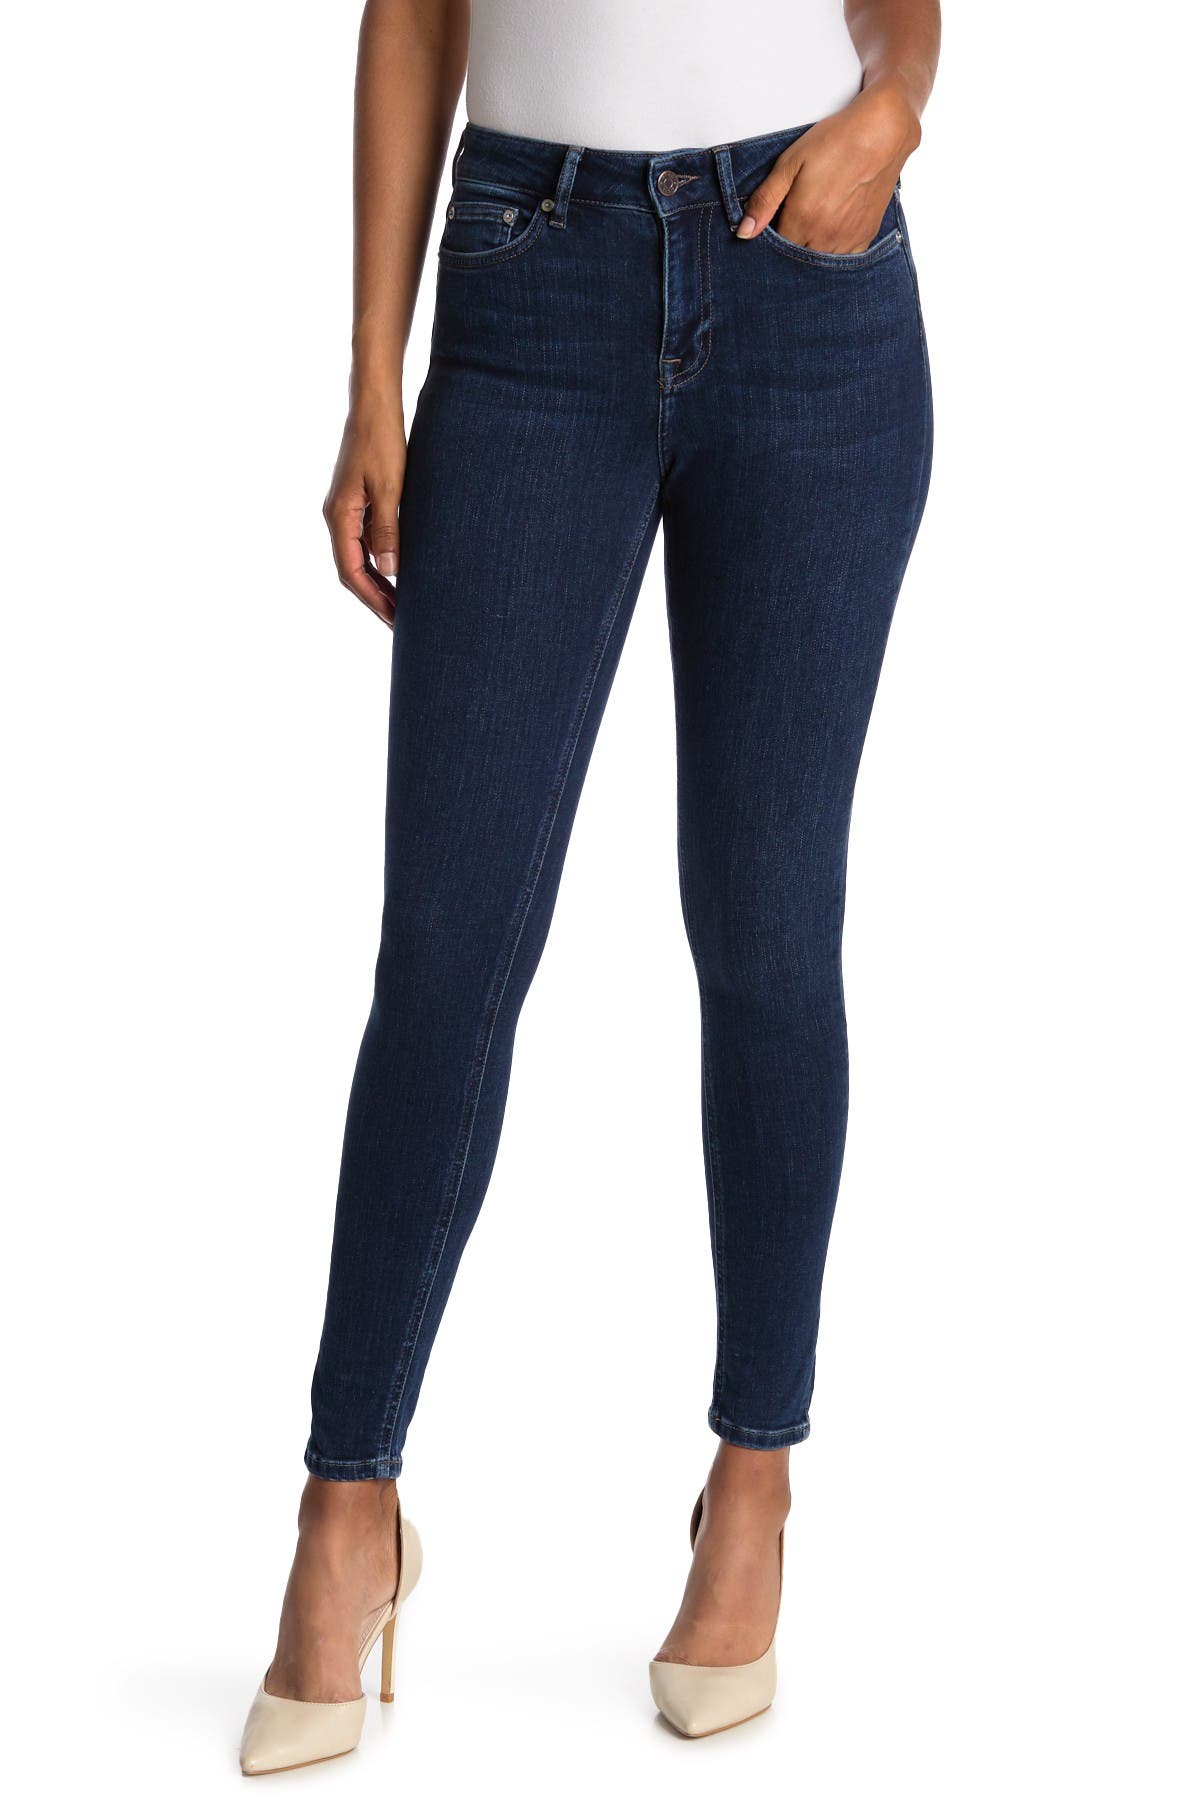 REISS LUX MID RISE SKINNY JEANS,439109622774